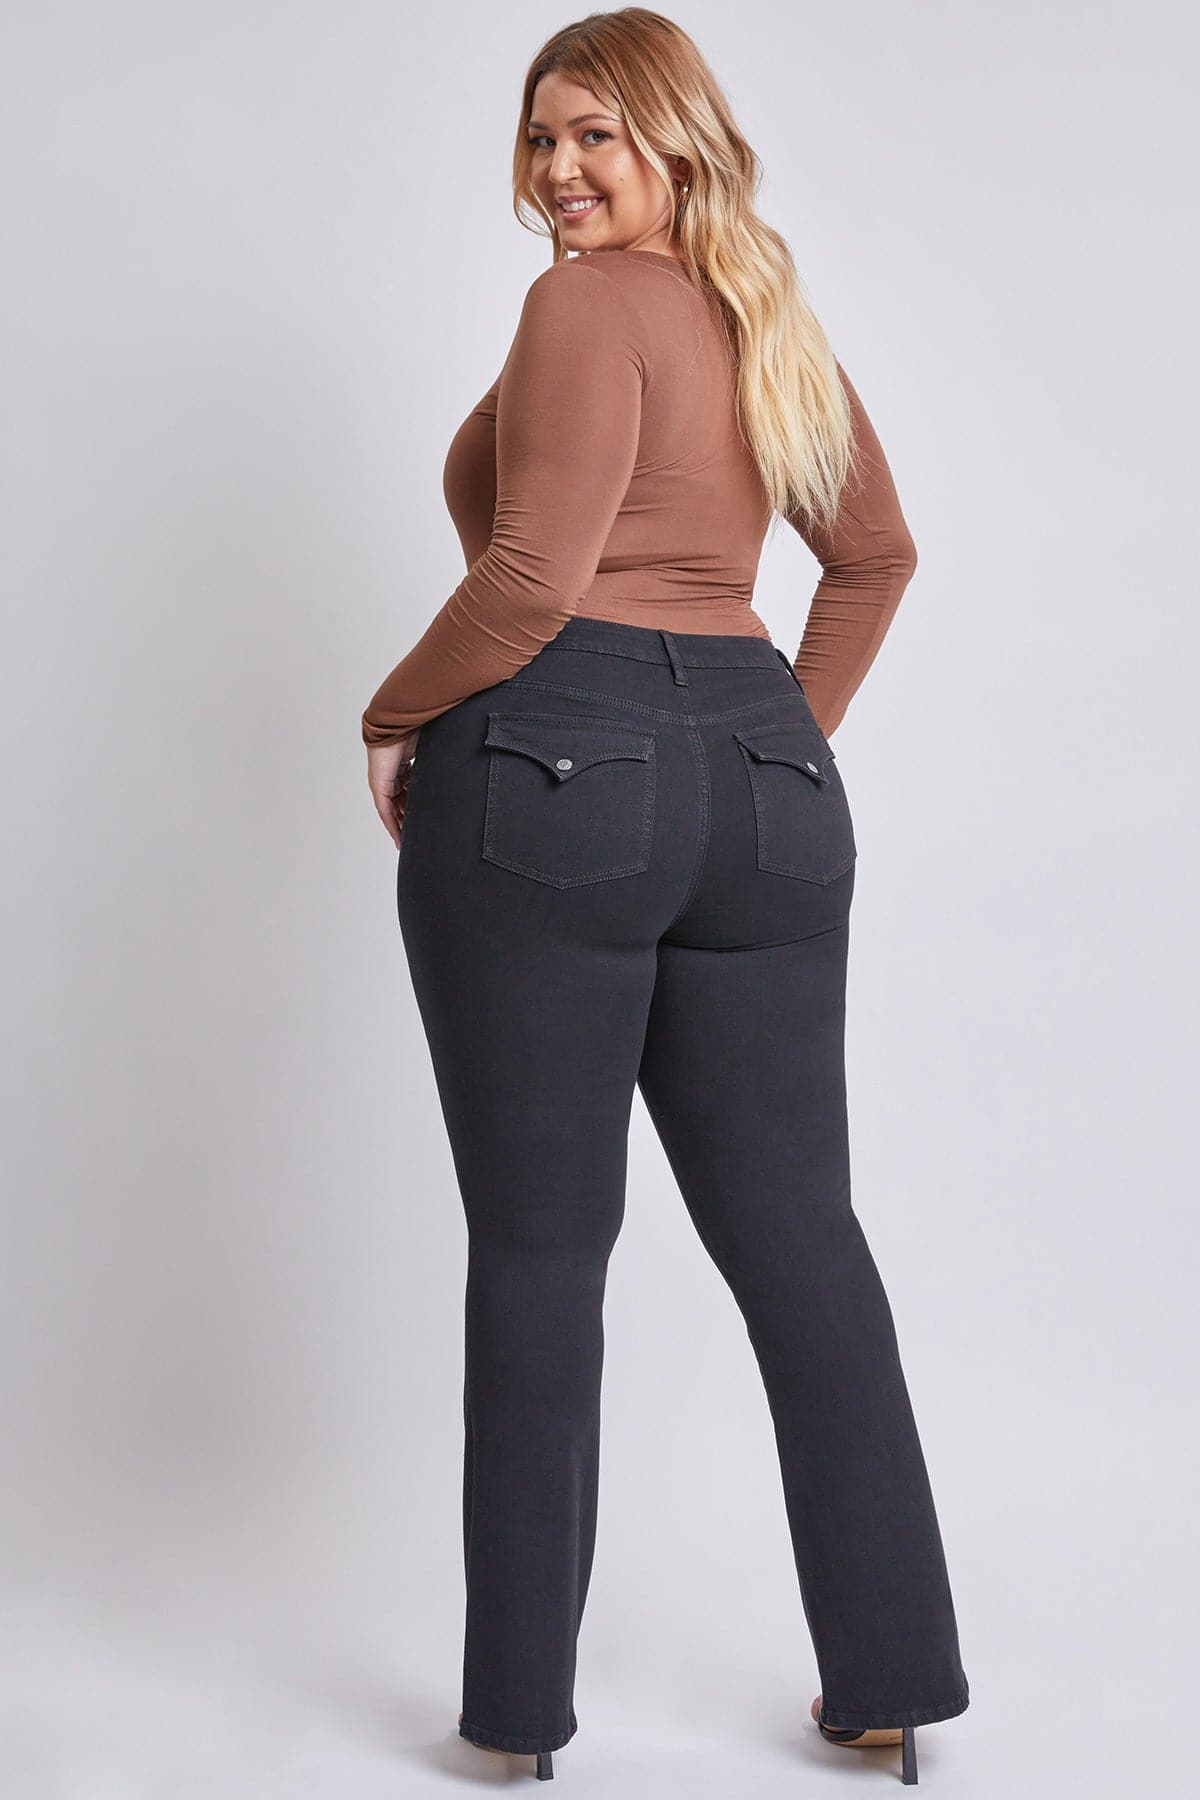 Women’s Plus Size Sustainable Mid Rise Boot Cut Jeans